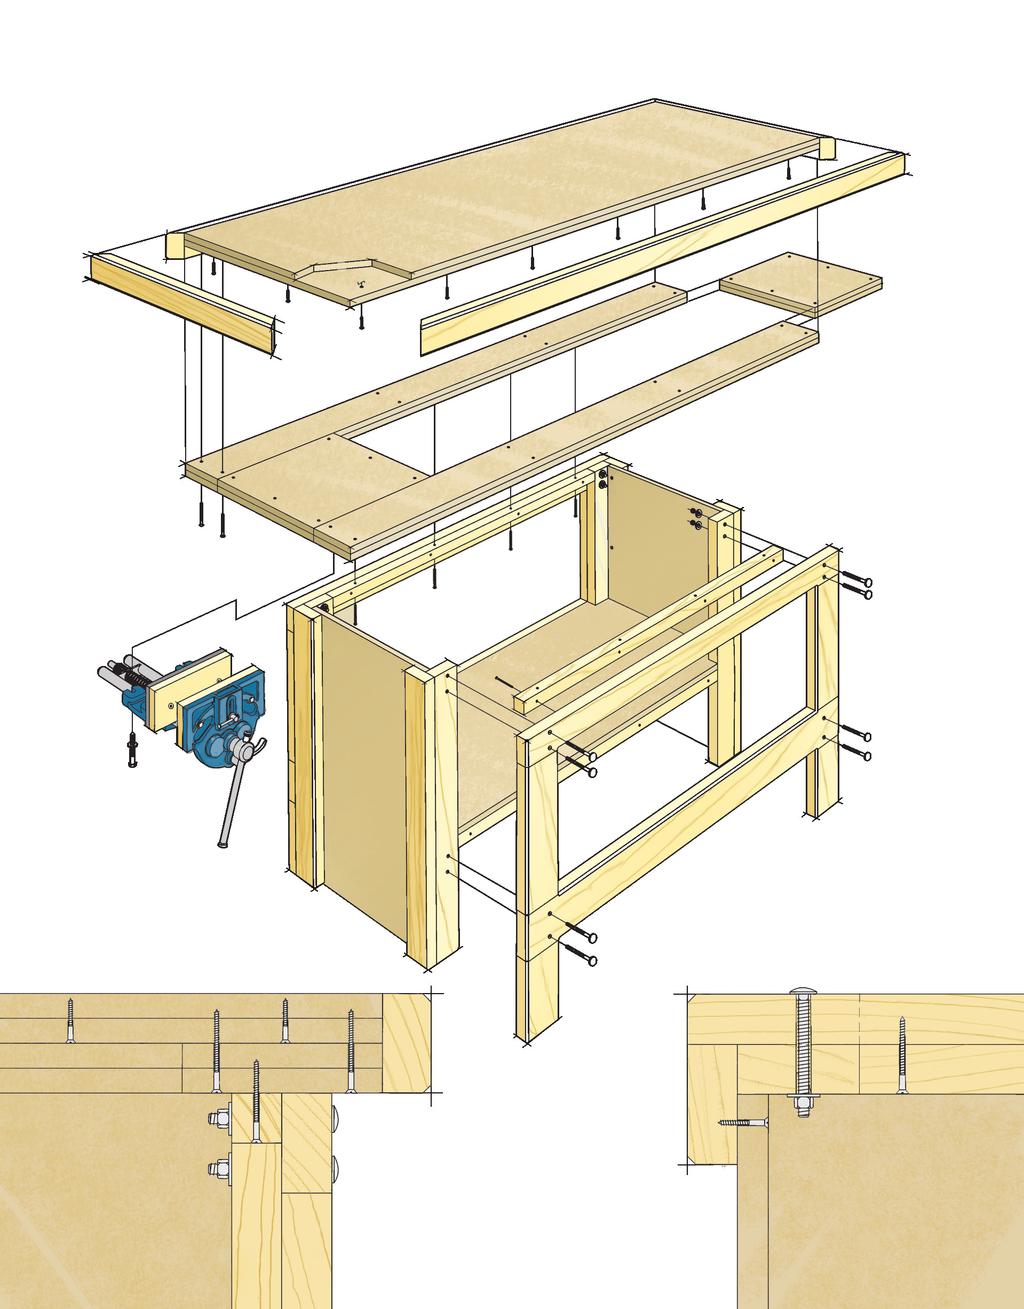 CHAMFER ON TOP AND BOTTOM SOFTENs EDGES TO PREVENT SPLINTERING Construction Details Overall Dimensions: 32" x 88" x 36" benchtop is built up from four layers of mdf for strength CUT-TO-FIT end